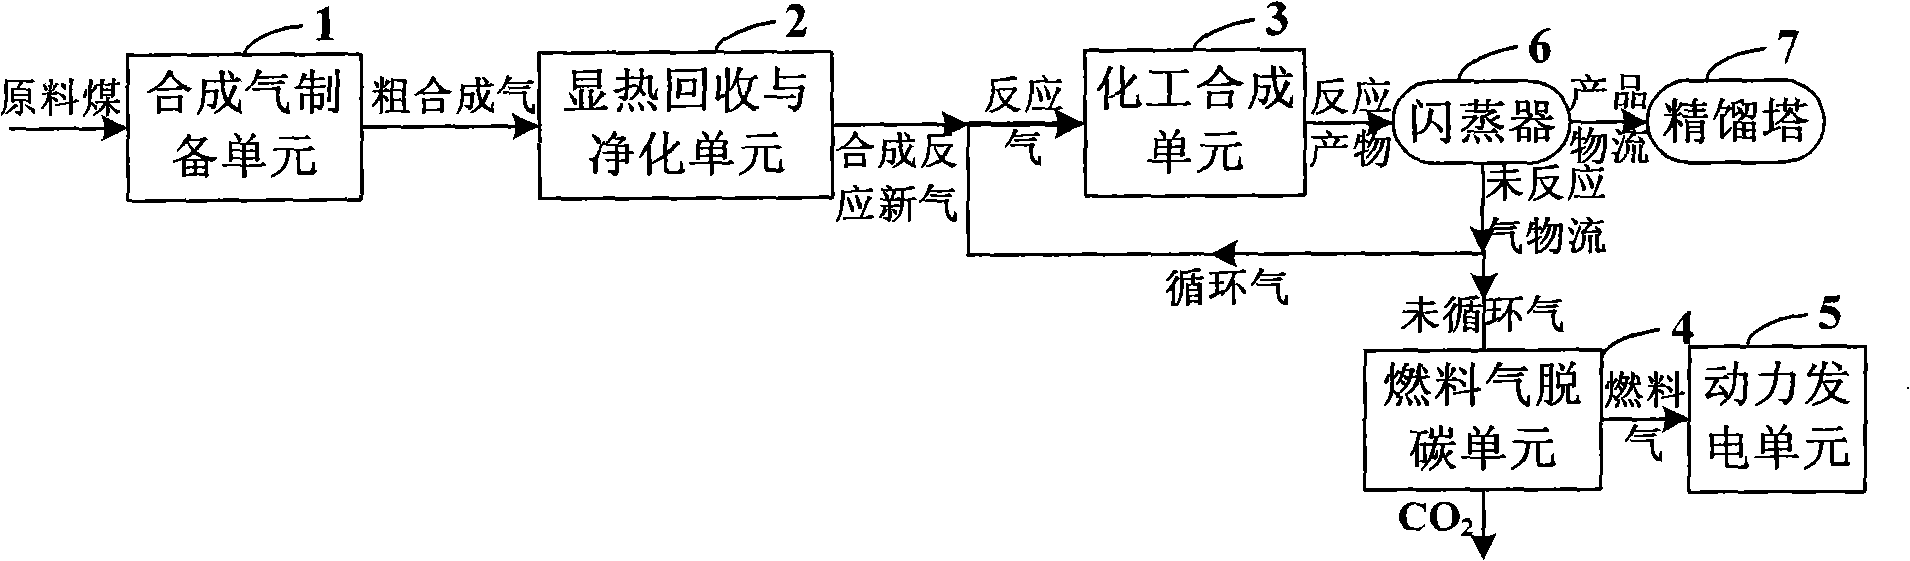 Chemical industry power multi-generation energy resource system and method for separating C02